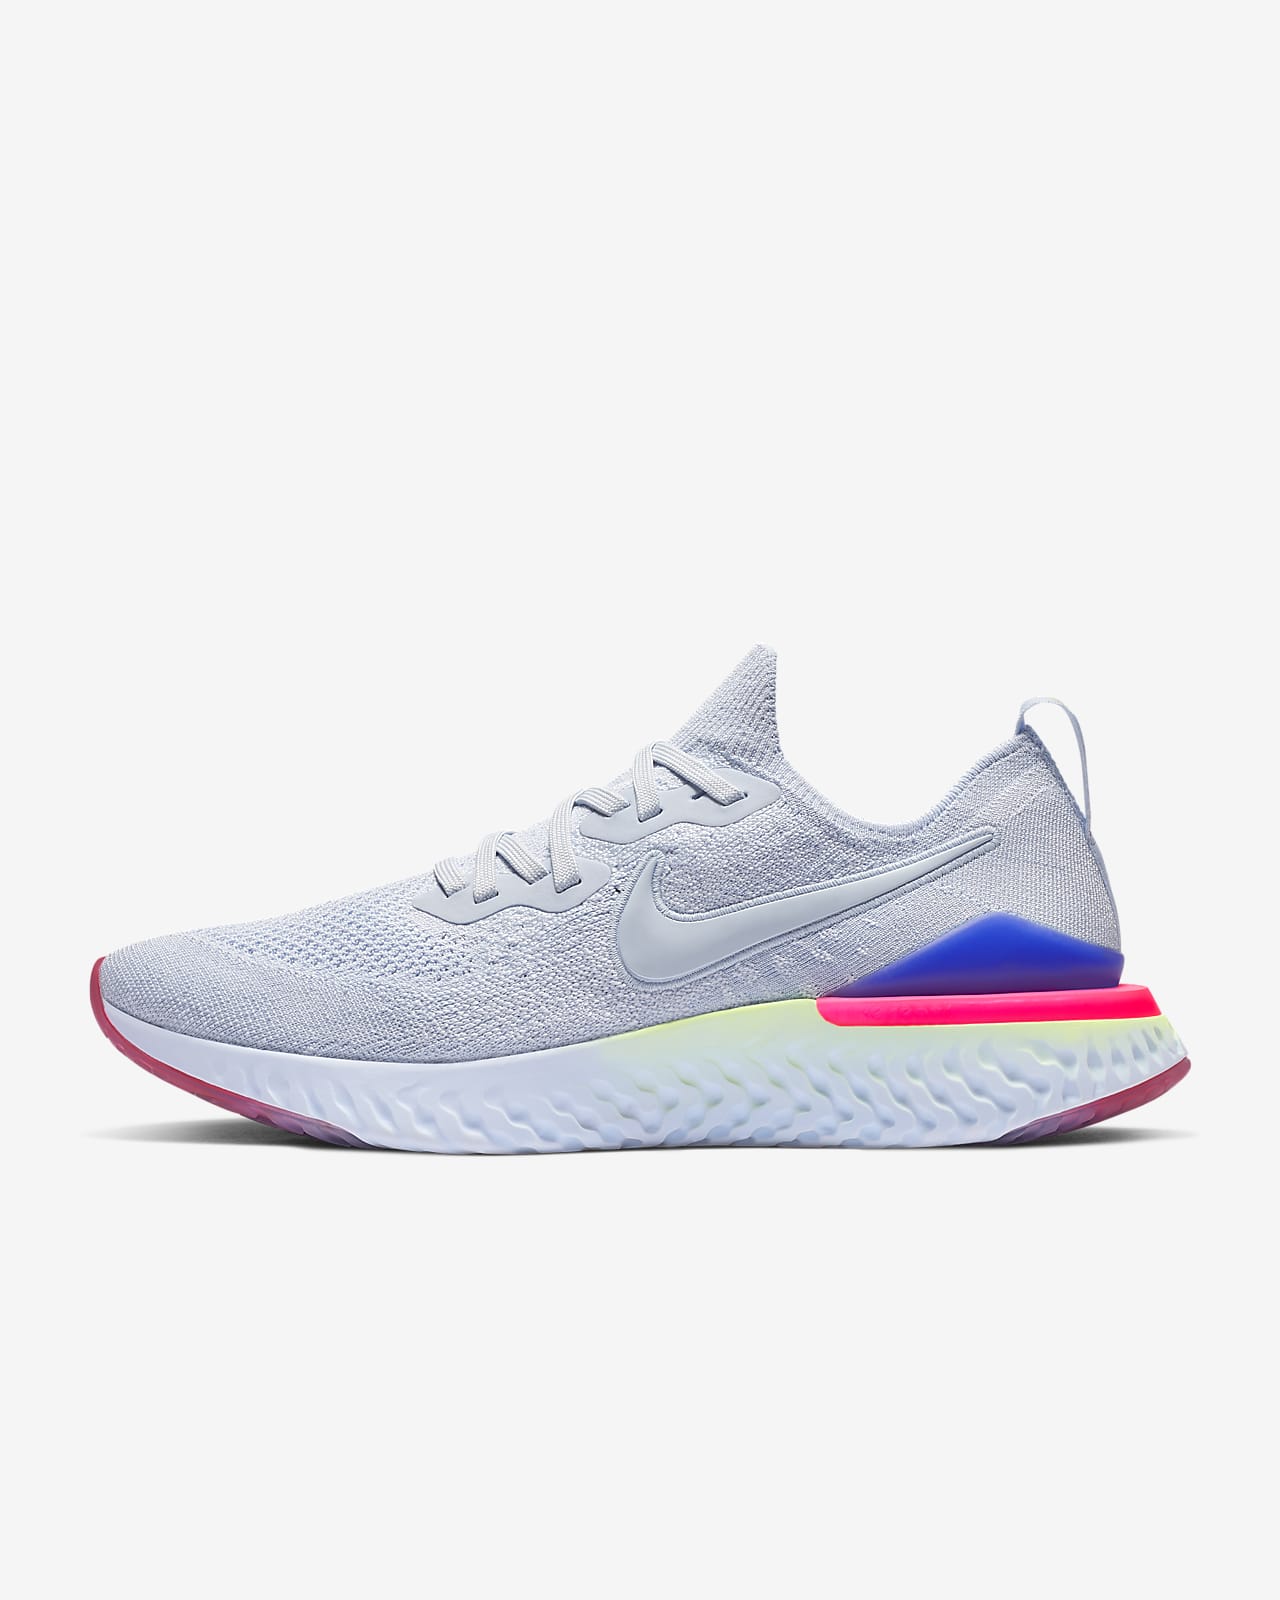 epic react flyknit 2 white blue red